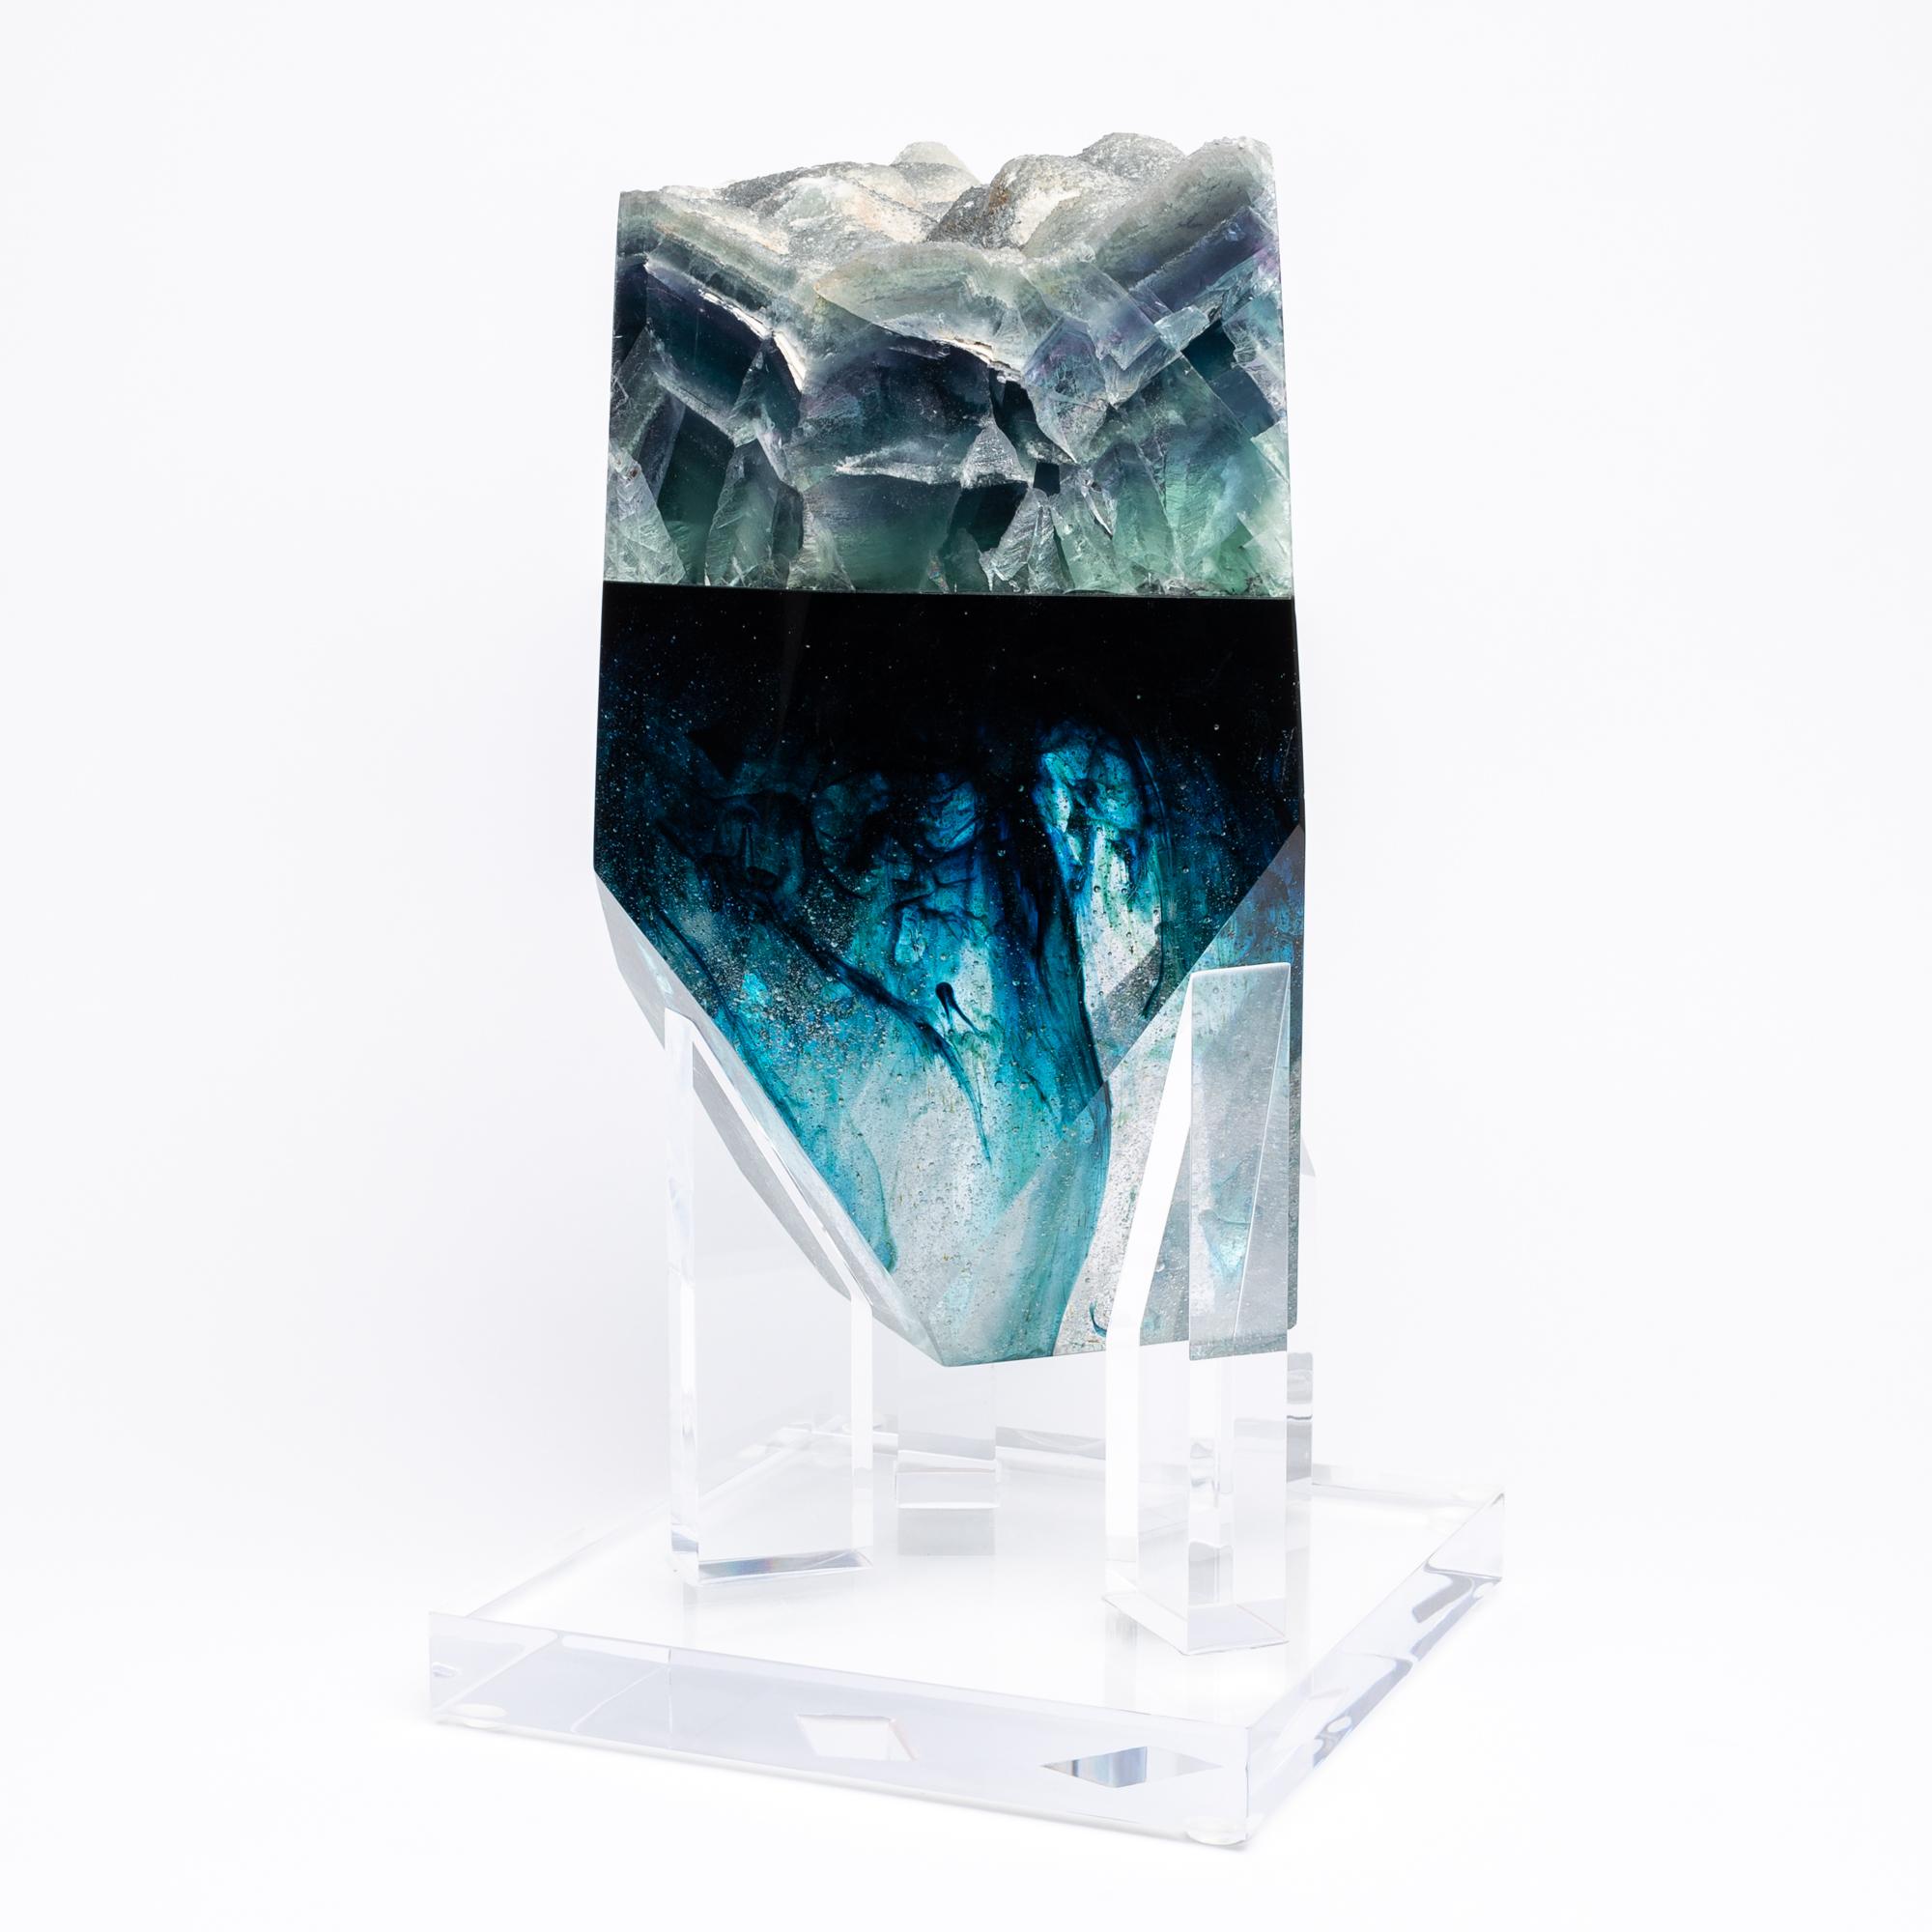 Krown Jewel - Fluorite and glass sculpture from Tyme collection, a collaboration by Orfeo Quagliata and Ernesto Durán

Tyme collection 
A dance between purity and detail bring a creation of unique pieces merging nature’s gems and human